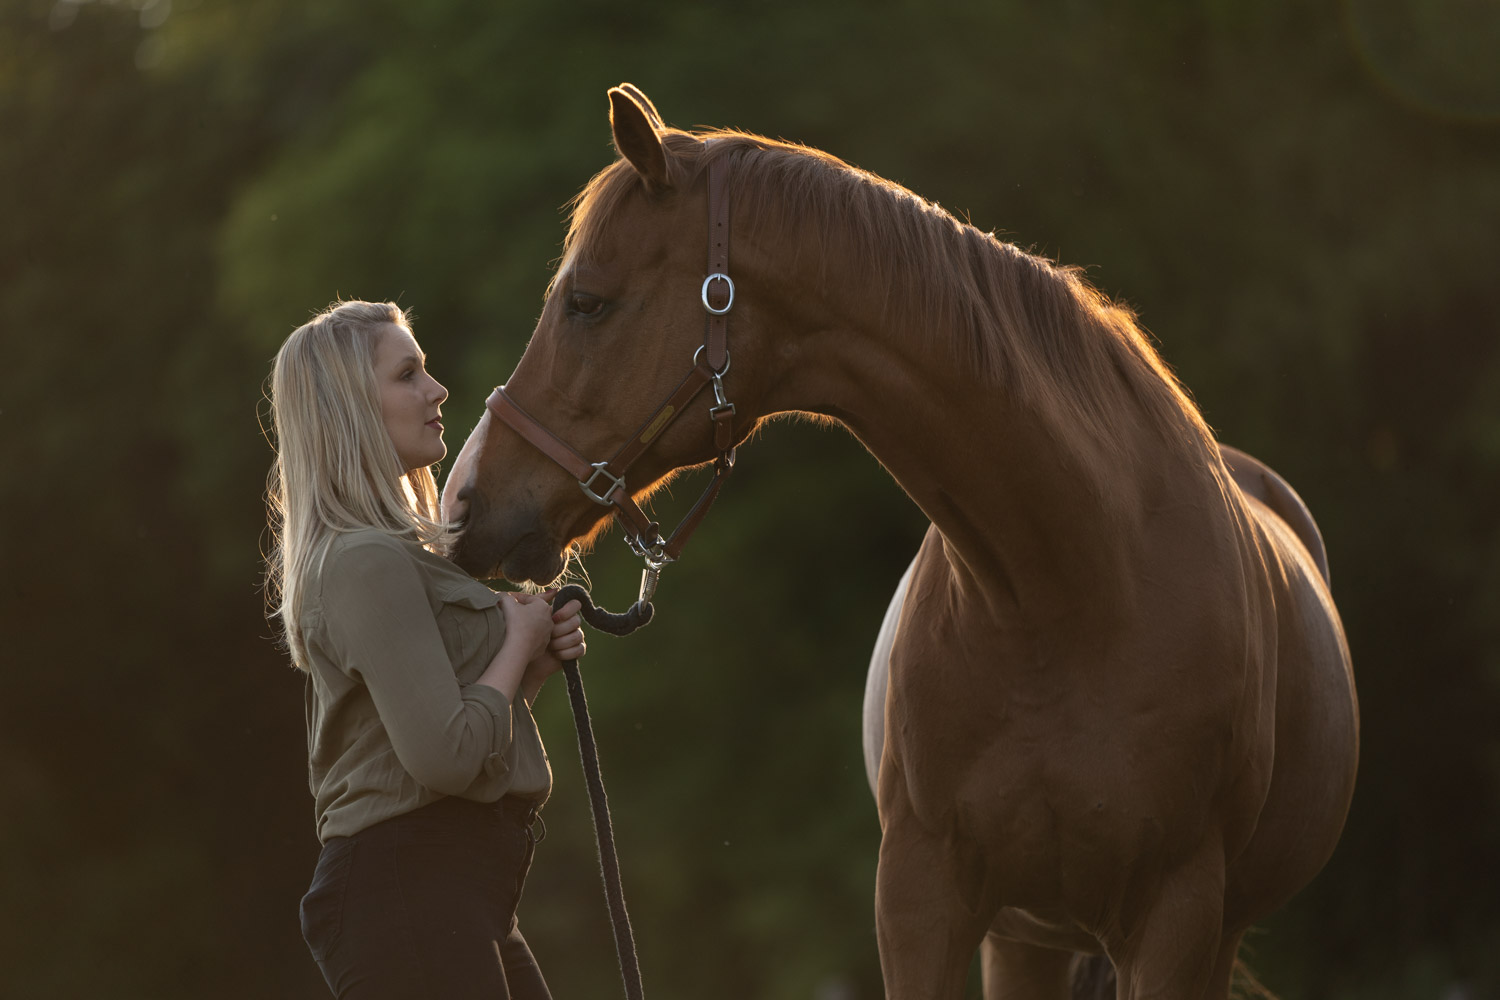 Tips and tricks for editing horse photography images